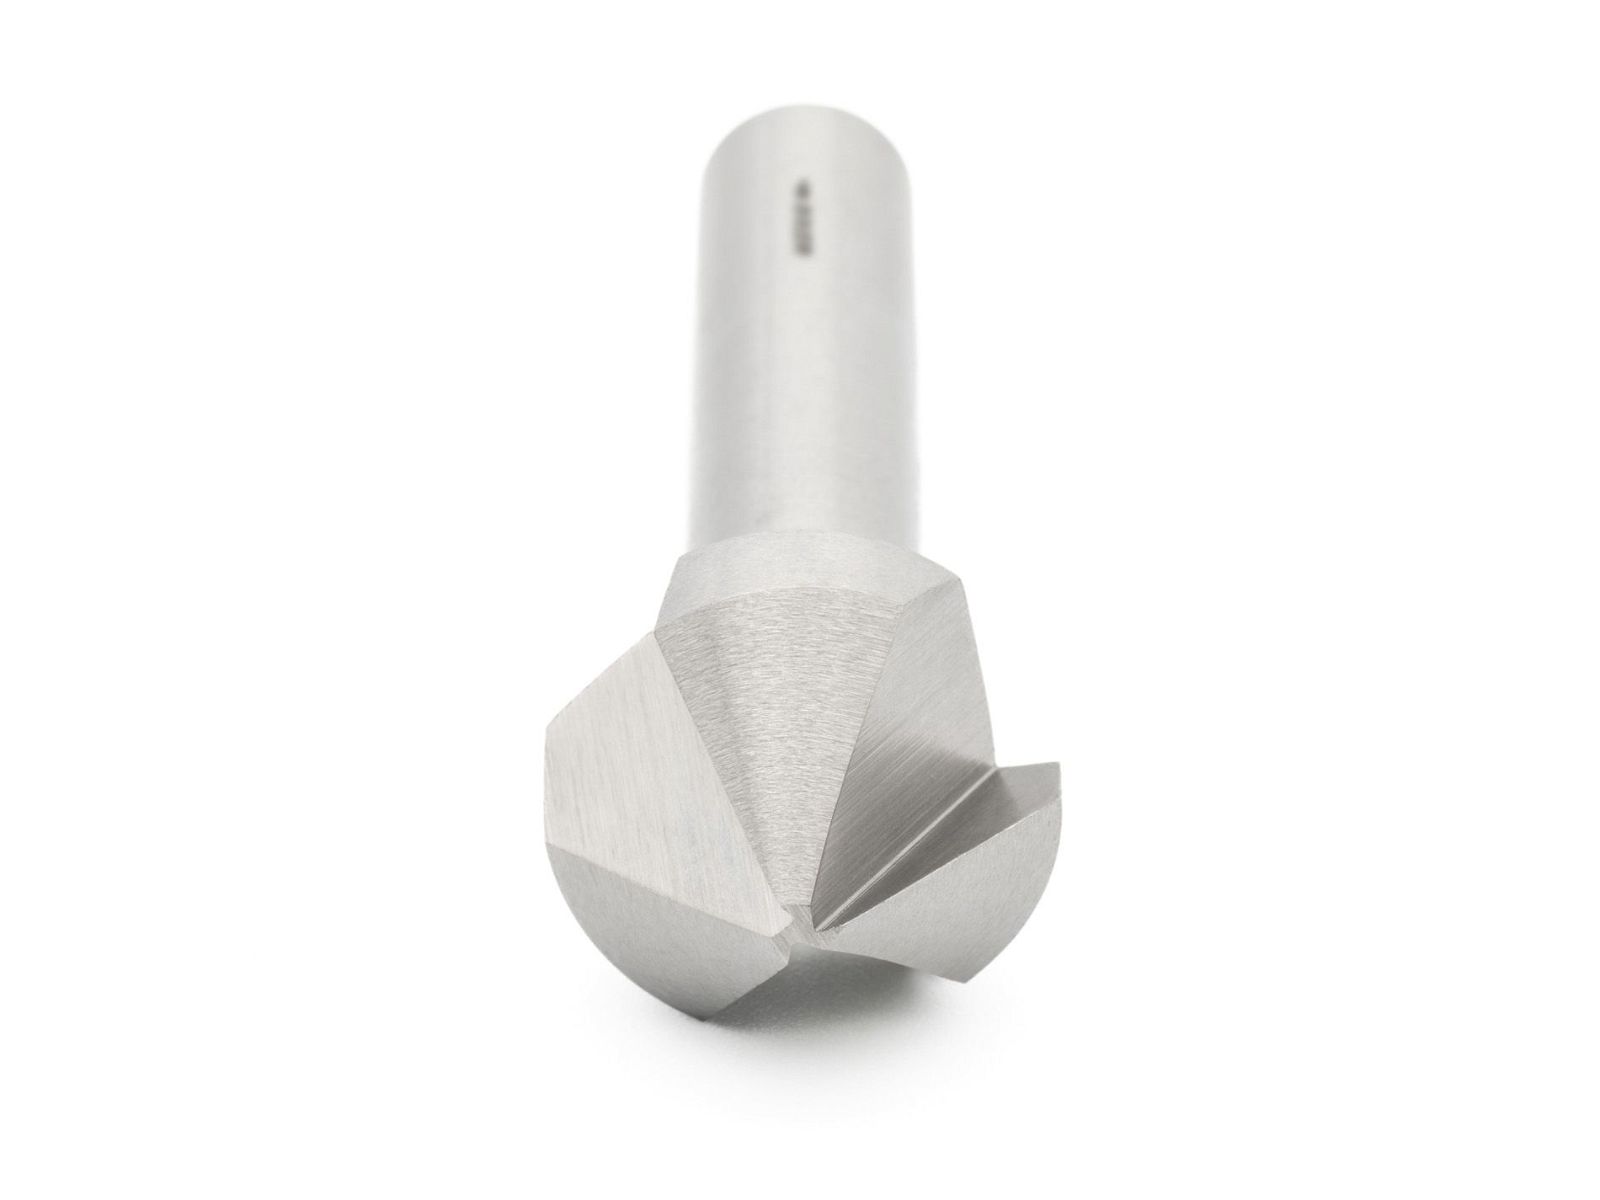 HSSG 90° Countersink 8.3 mm (for M 4)